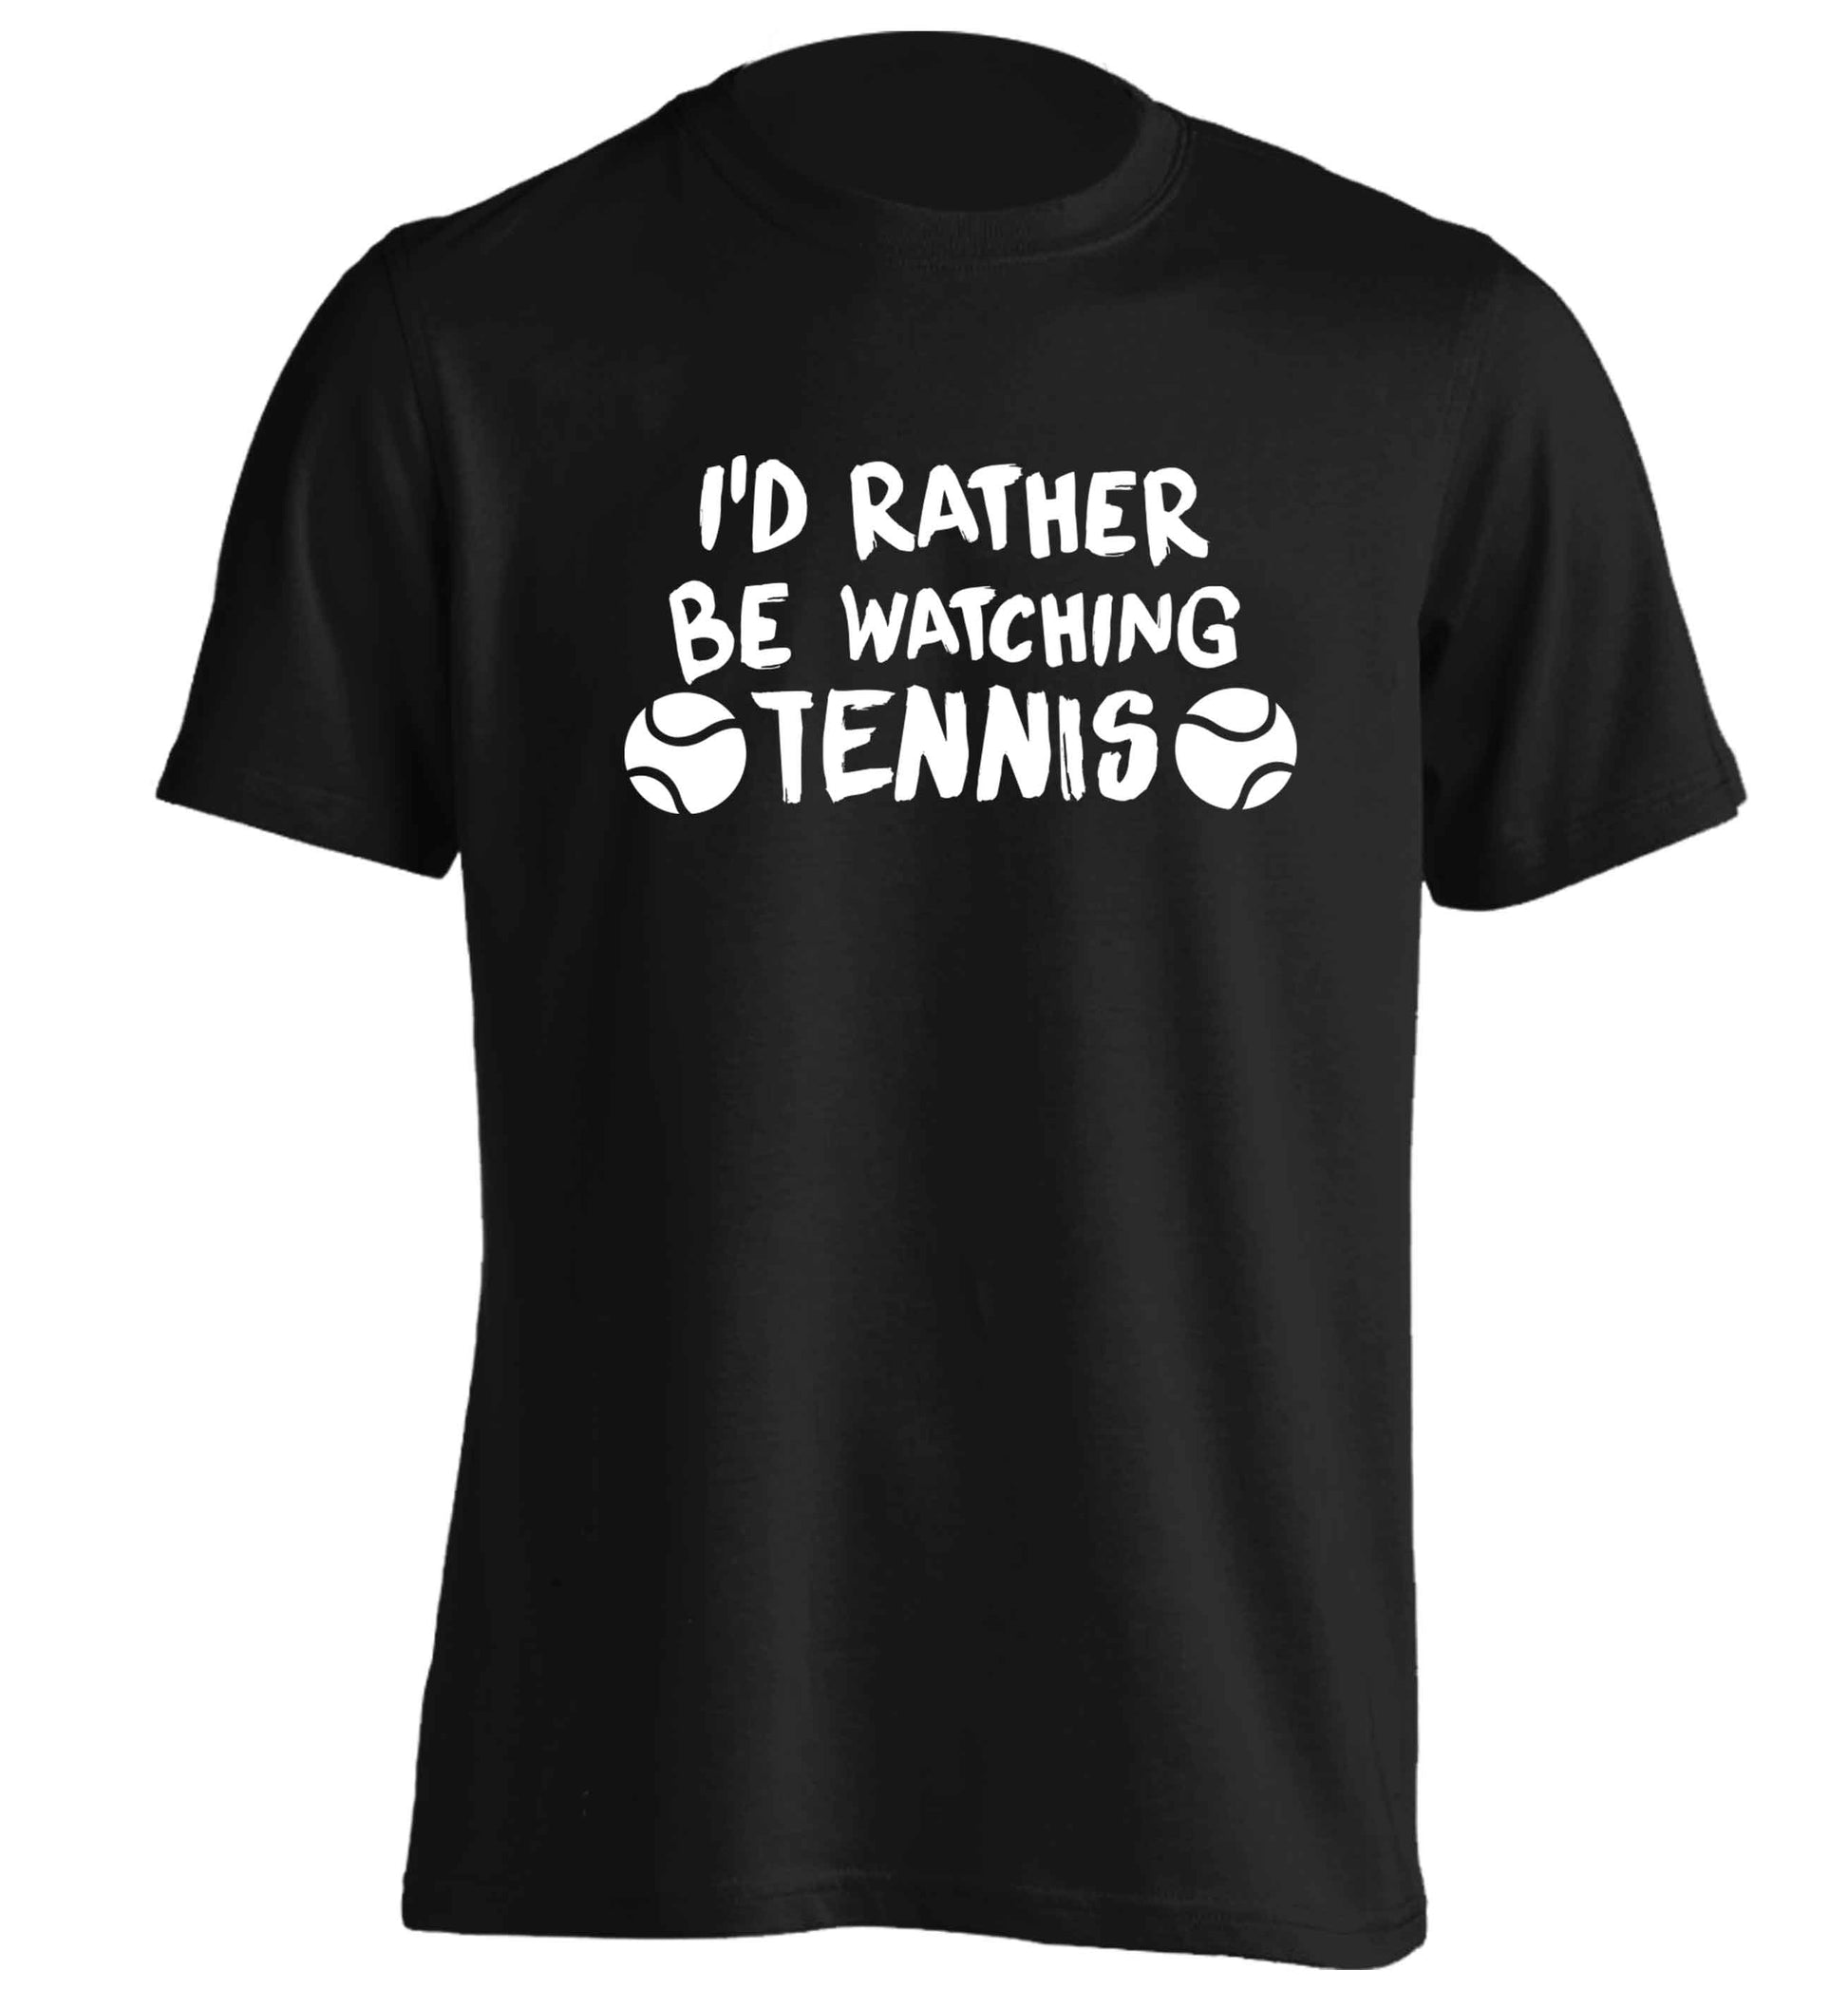 I'd rather be watching the tennis adults unisex black Tshirt 2XL